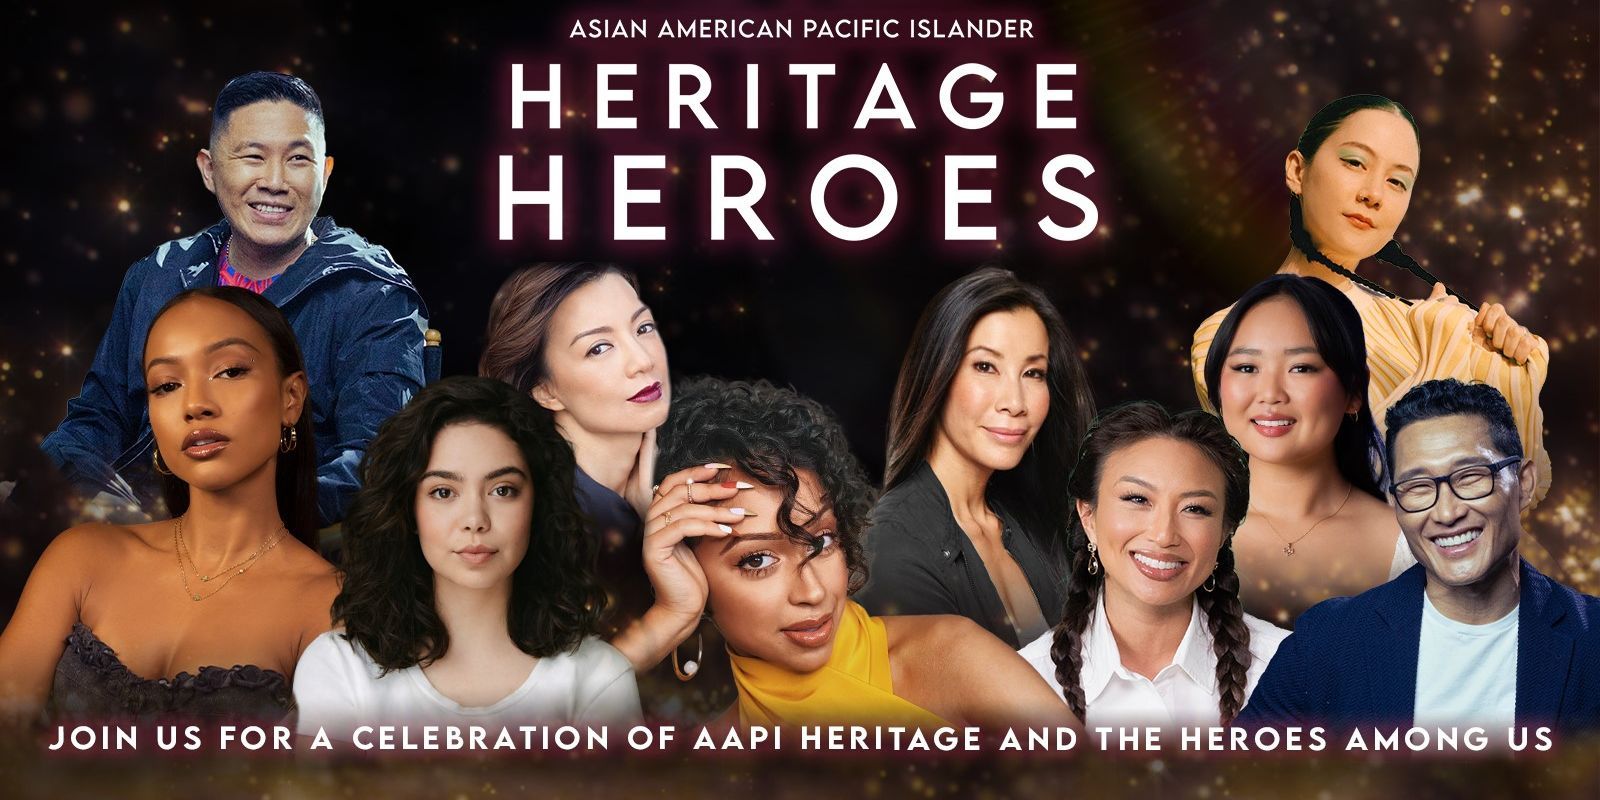 TAAF AAPI Heritage Heroes posters with headshots of notable AAPI professionals.